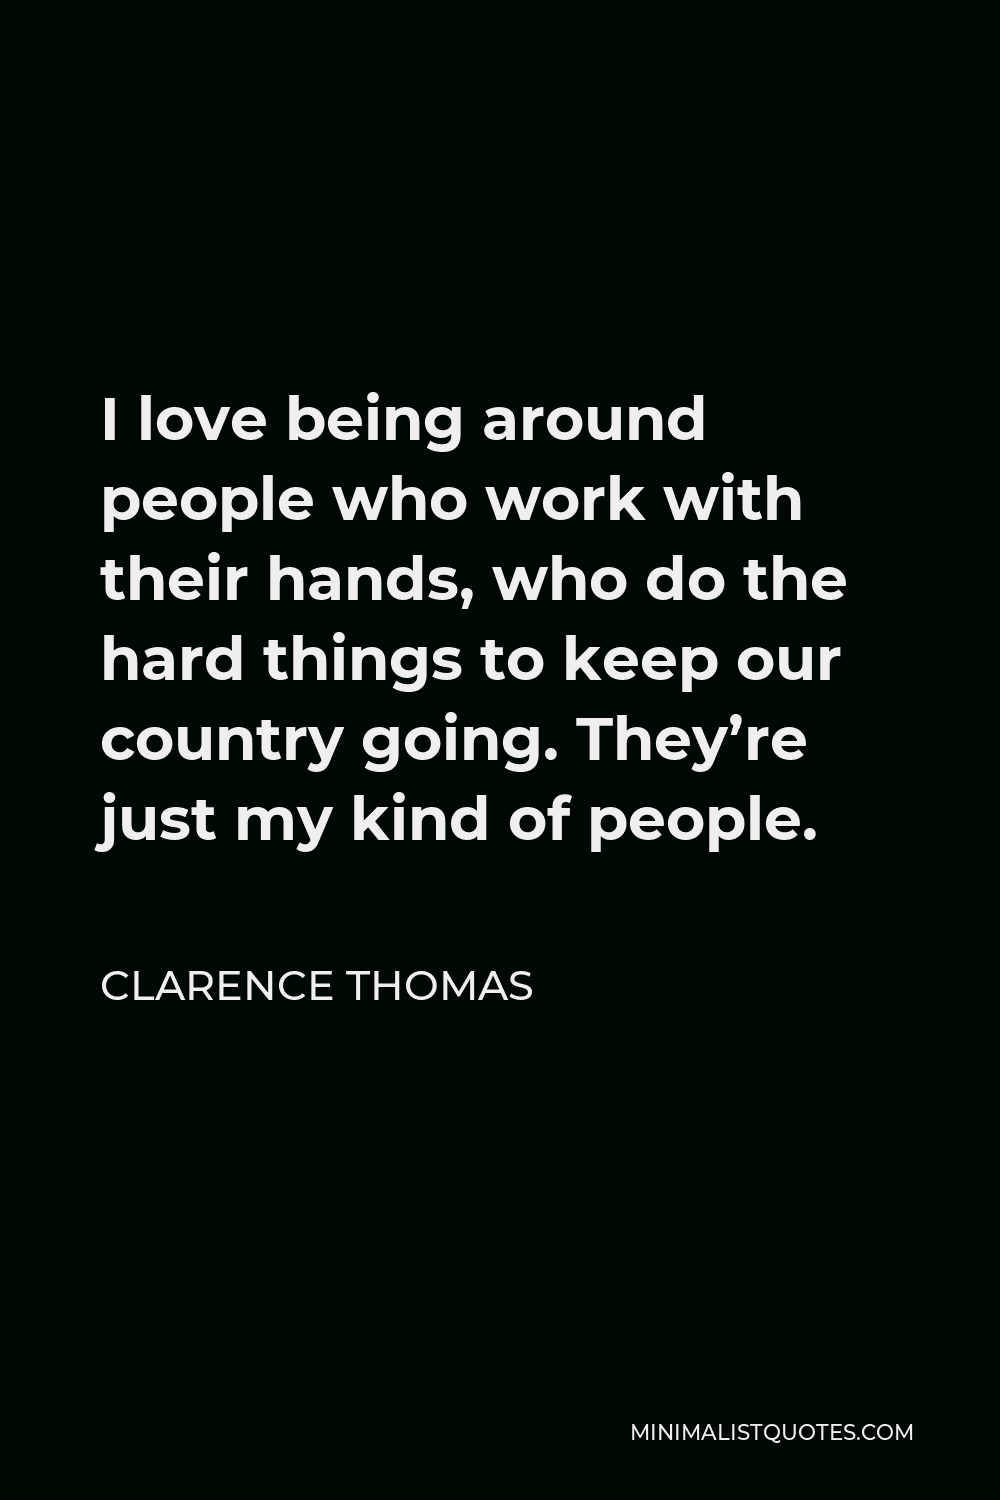 Clarence Thomas Quote - I love being around people who work with their hands, who do the hard things to keep our country going. They’re just my kind of people.